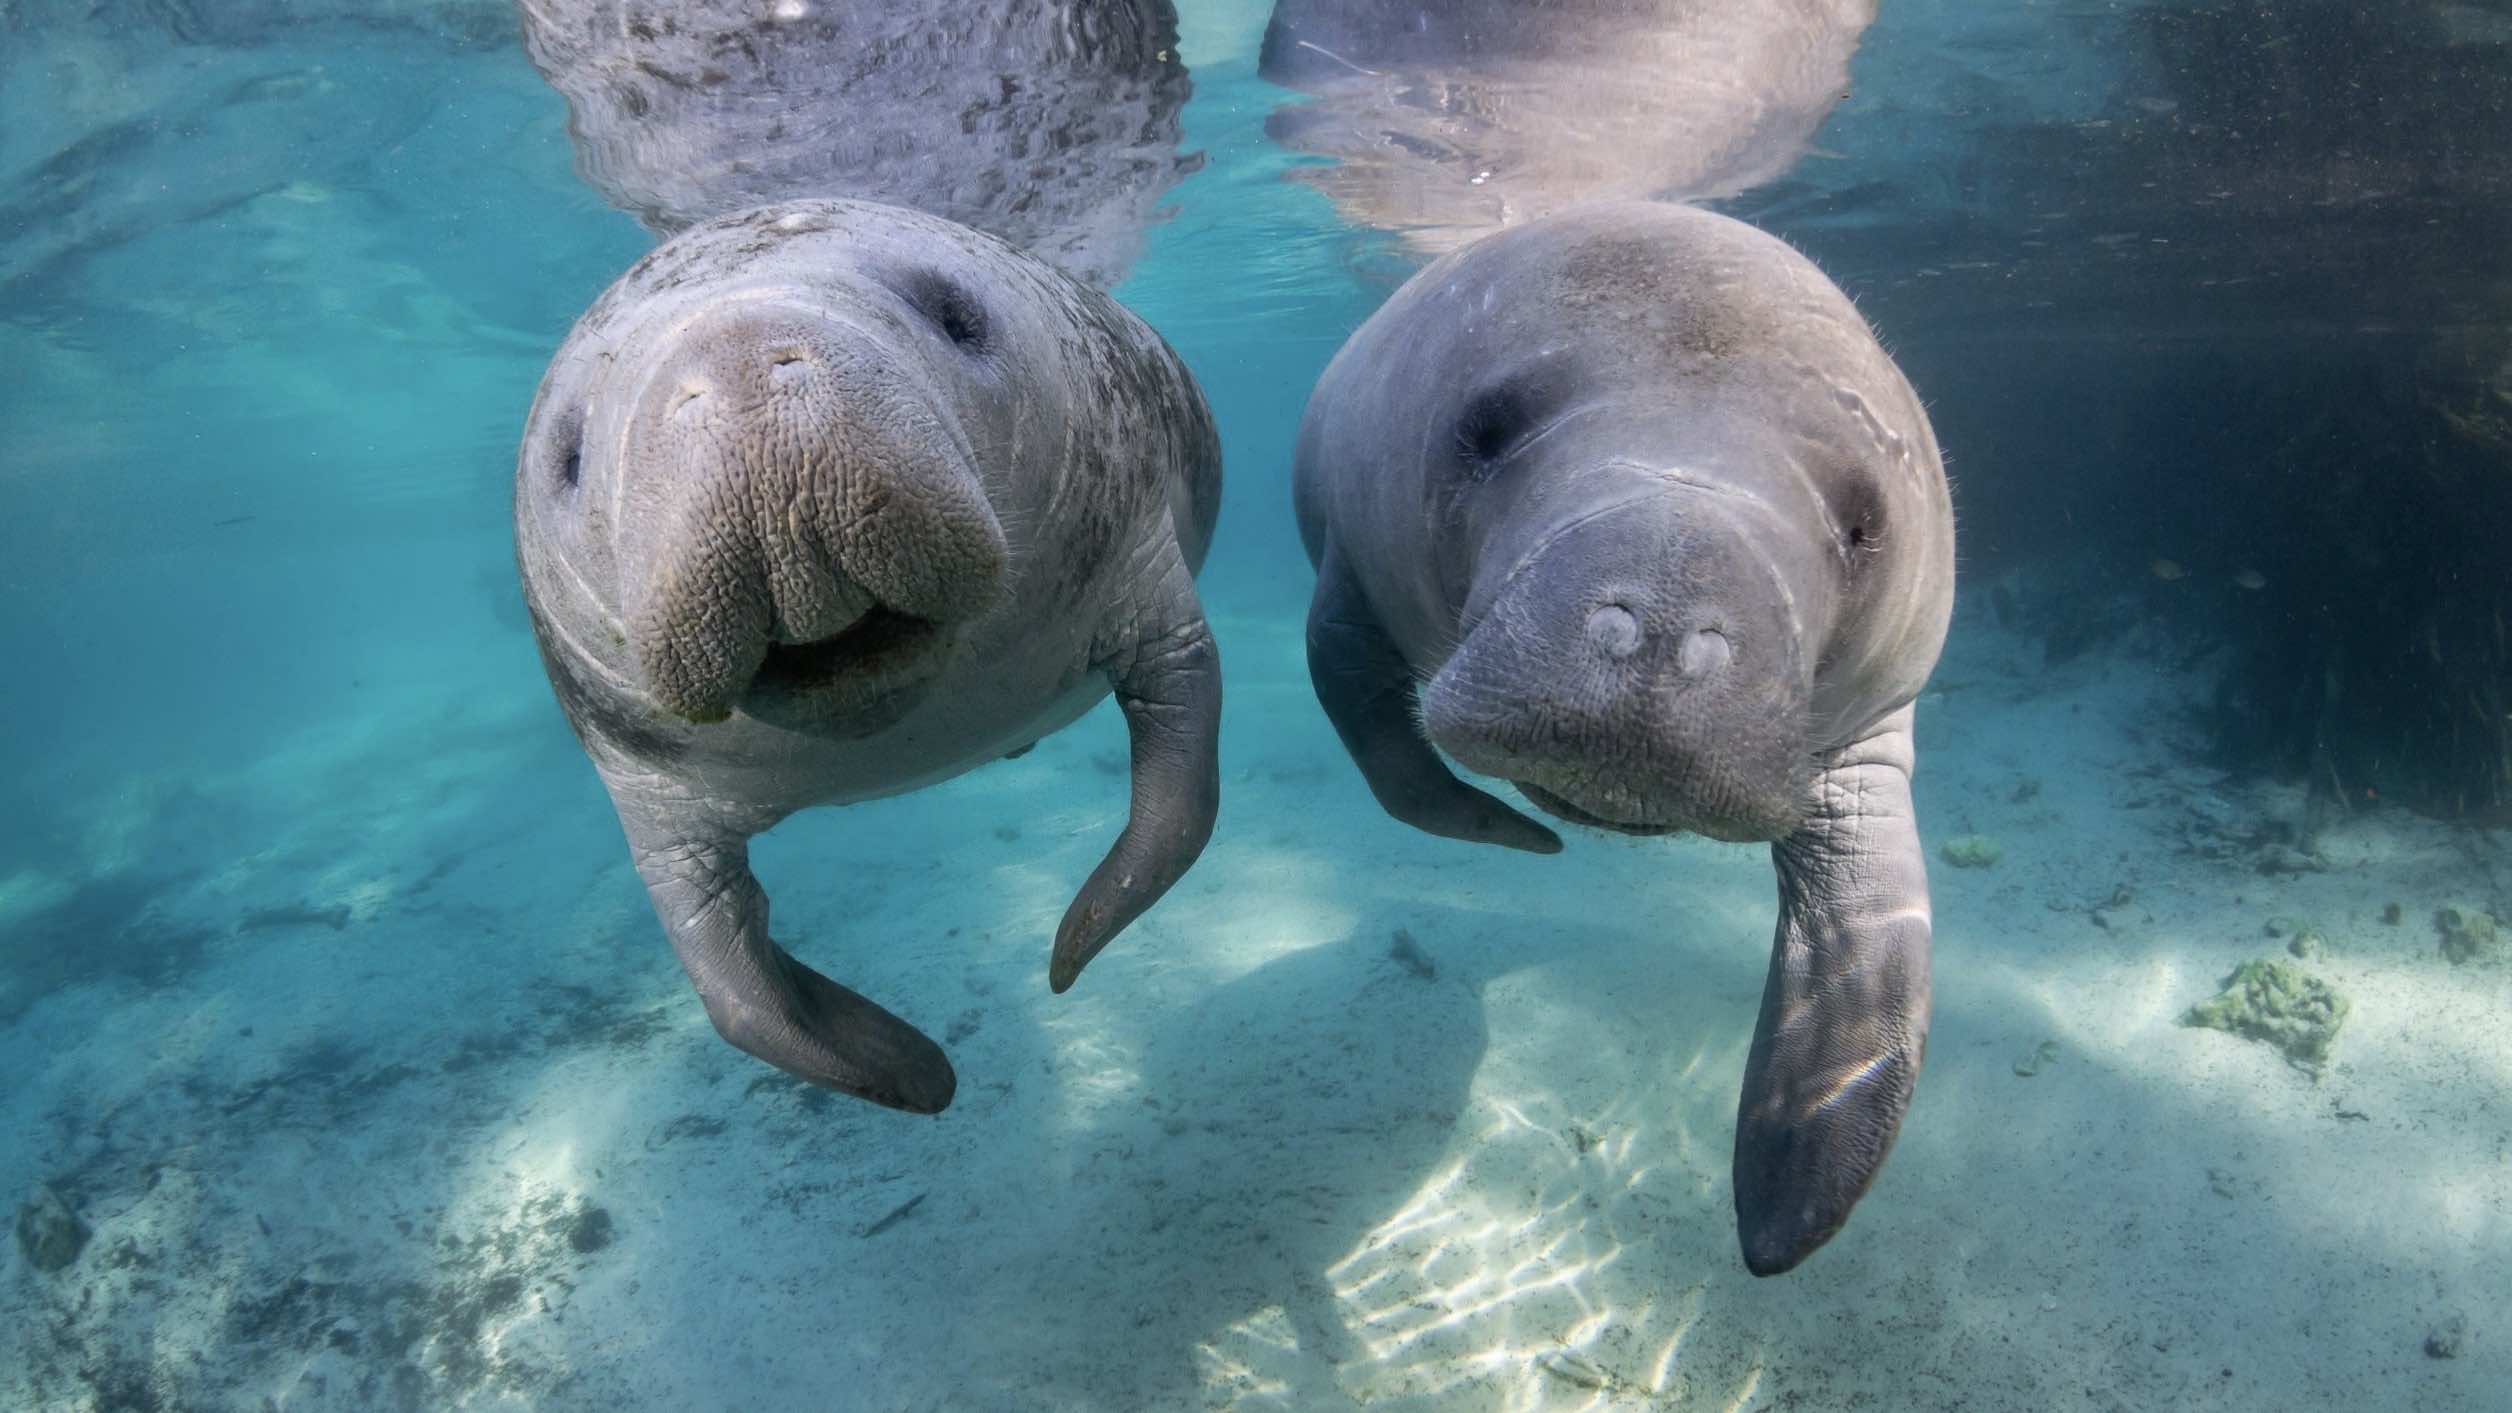 1.	Hundreds of West Indian manatees migrate to Crystal River each winter (photo courtesy Discover Crystal River)